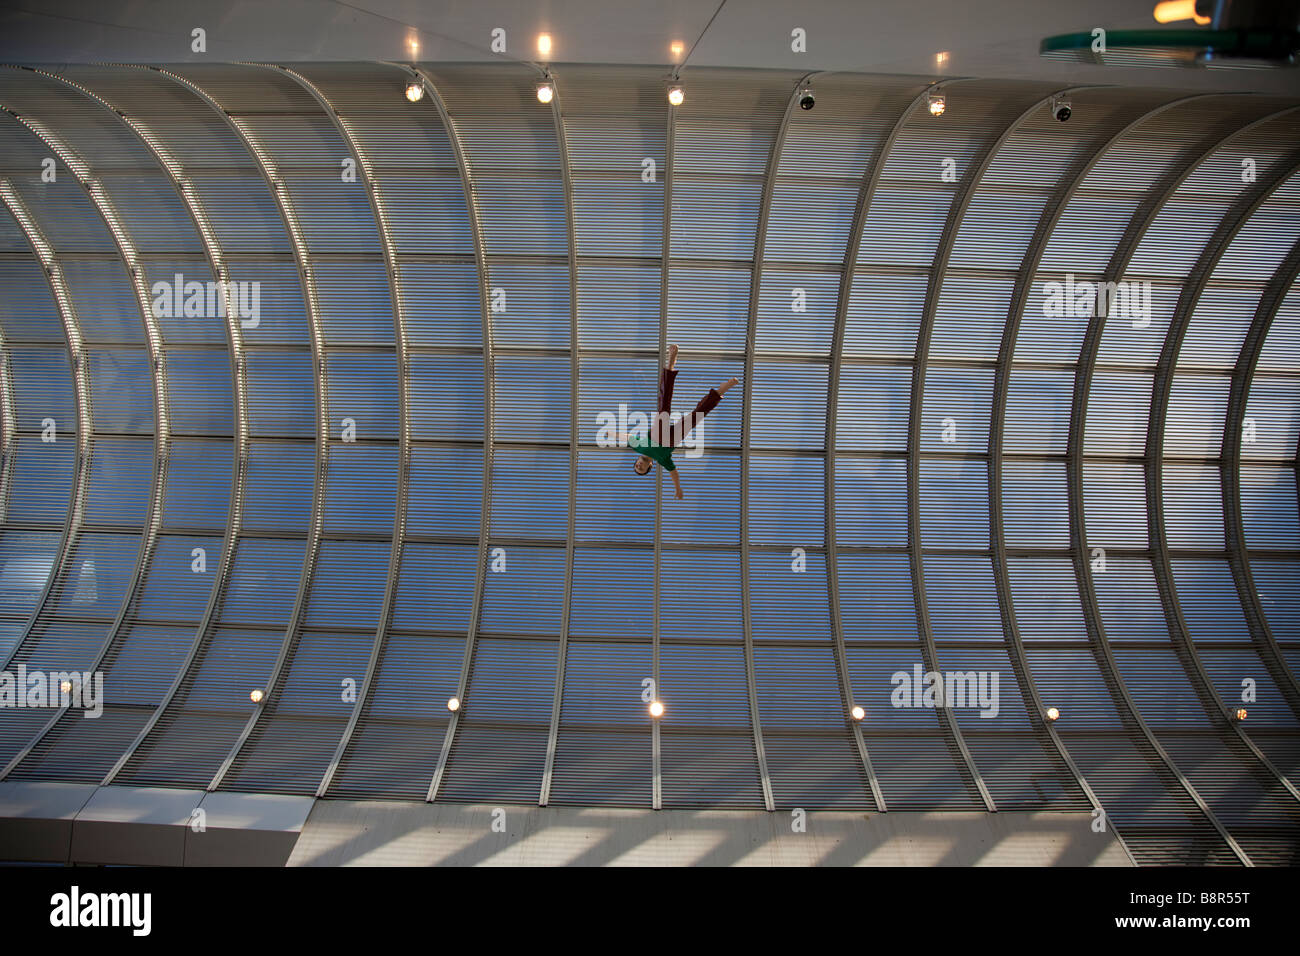 Human figure hanging high under the dome roof Stock Photo